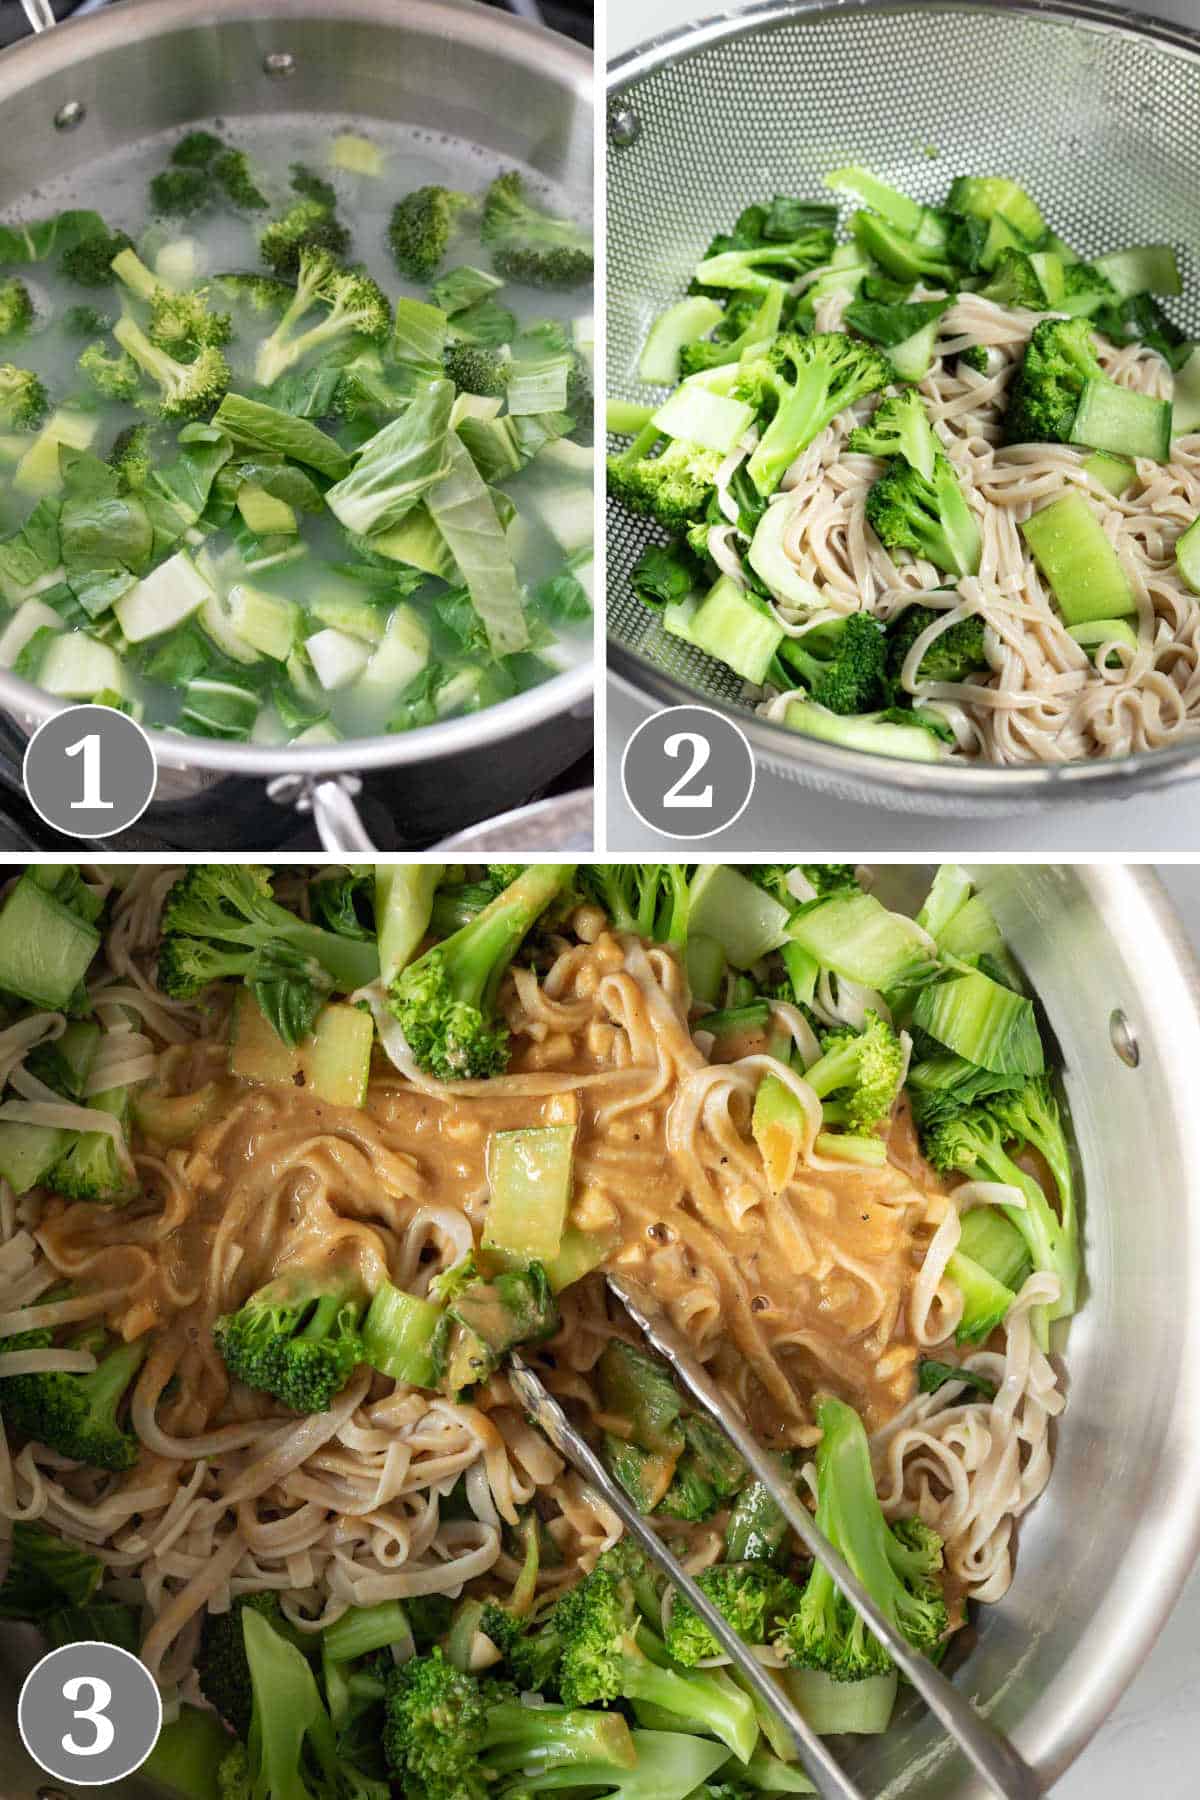 A 3-photo collage showing the steps of cooking noodles, draining, and tossing with tahini sauce.